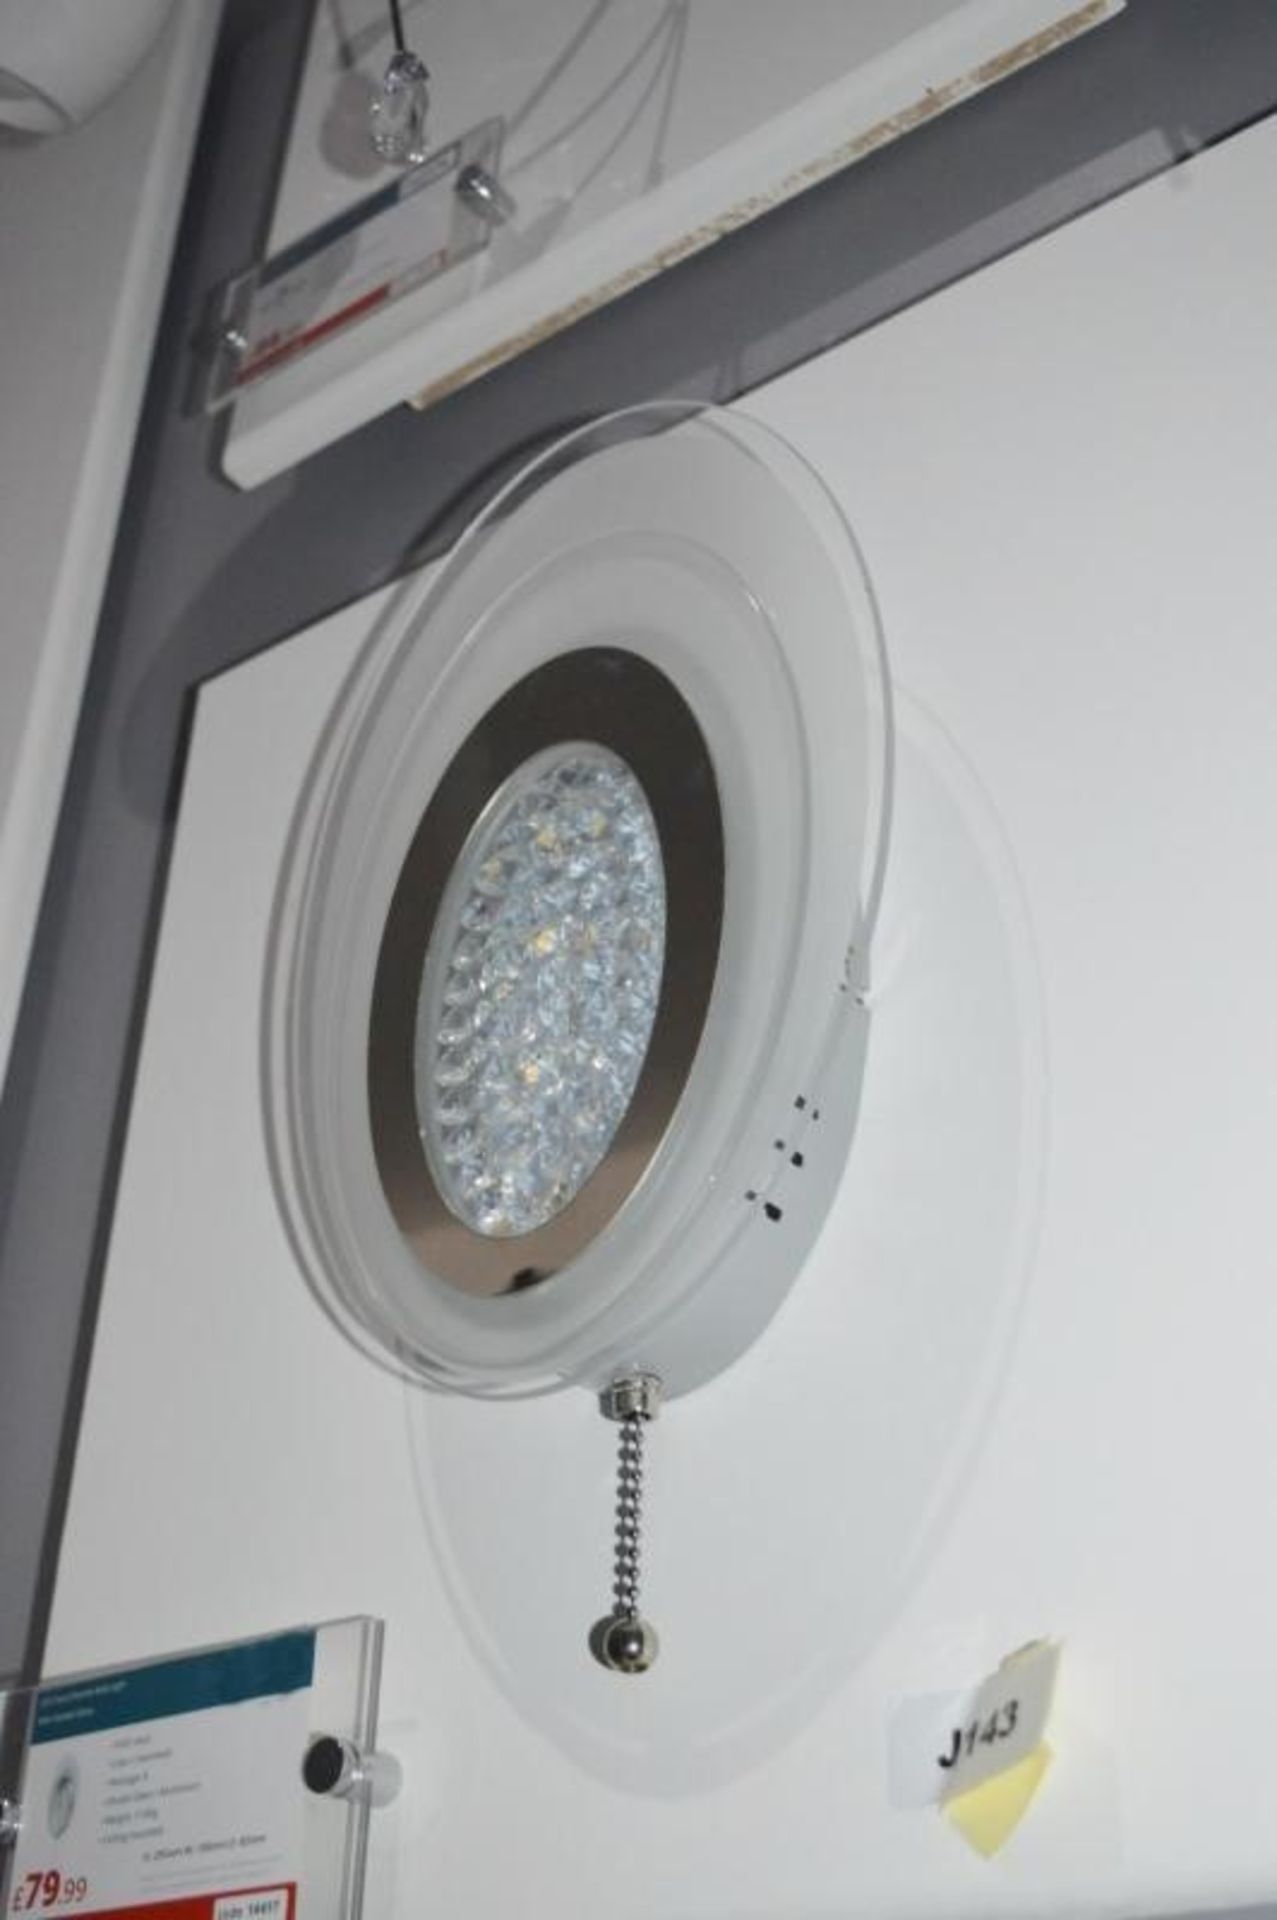 1 x LED Oval Chrome Wall Light With Frosted Glass - Ex Display Stock - CL298 - Ref J143 - Location: - Bild 3 aus 5